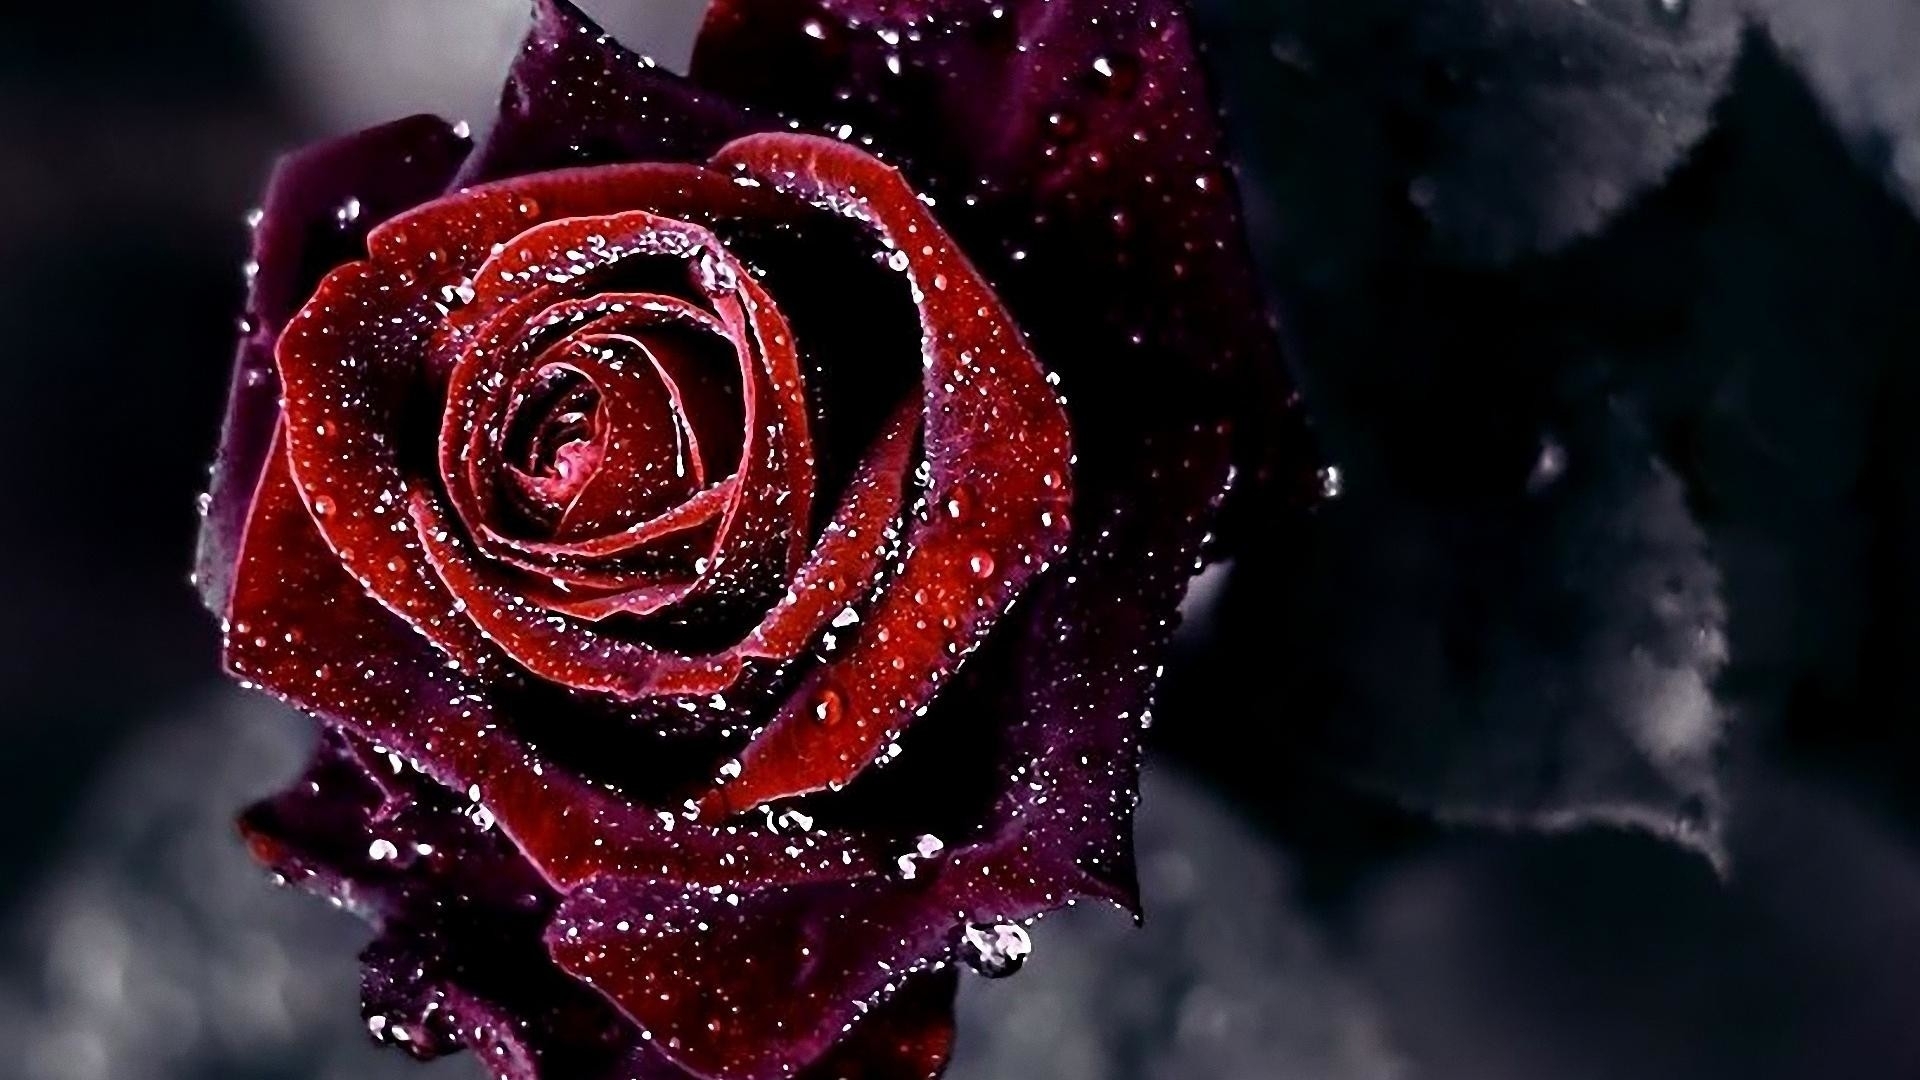 10 Top Dark Red Rose Wallpapers FULL HD 1080p For PC ...